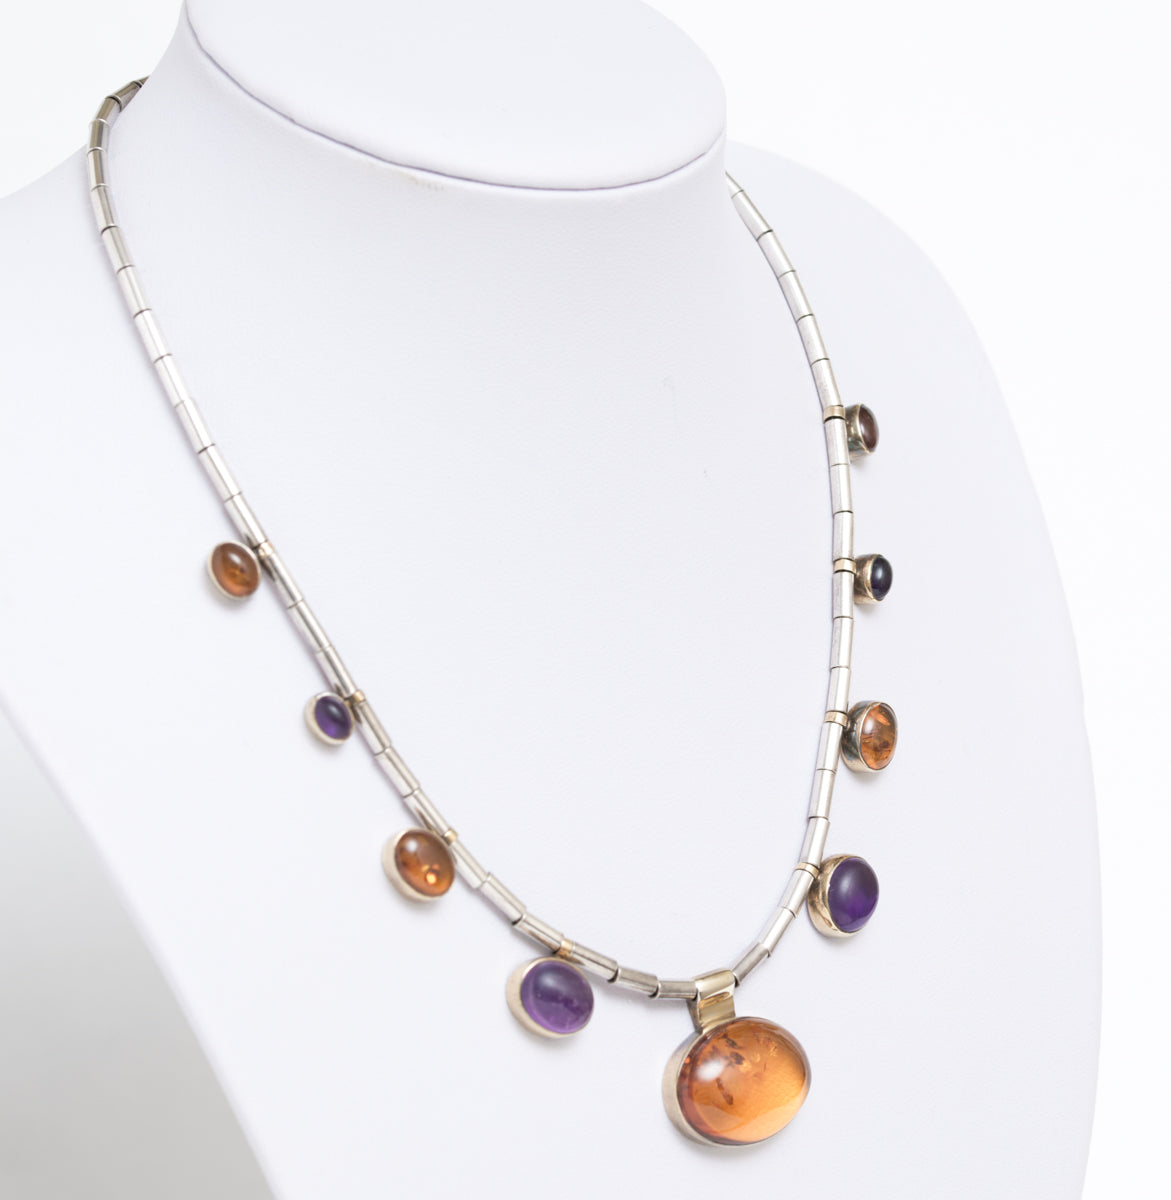 Vintage Sterling Silver Natural Amethyst & Amber Necklace In Crisson Bermuda Box (A1910)